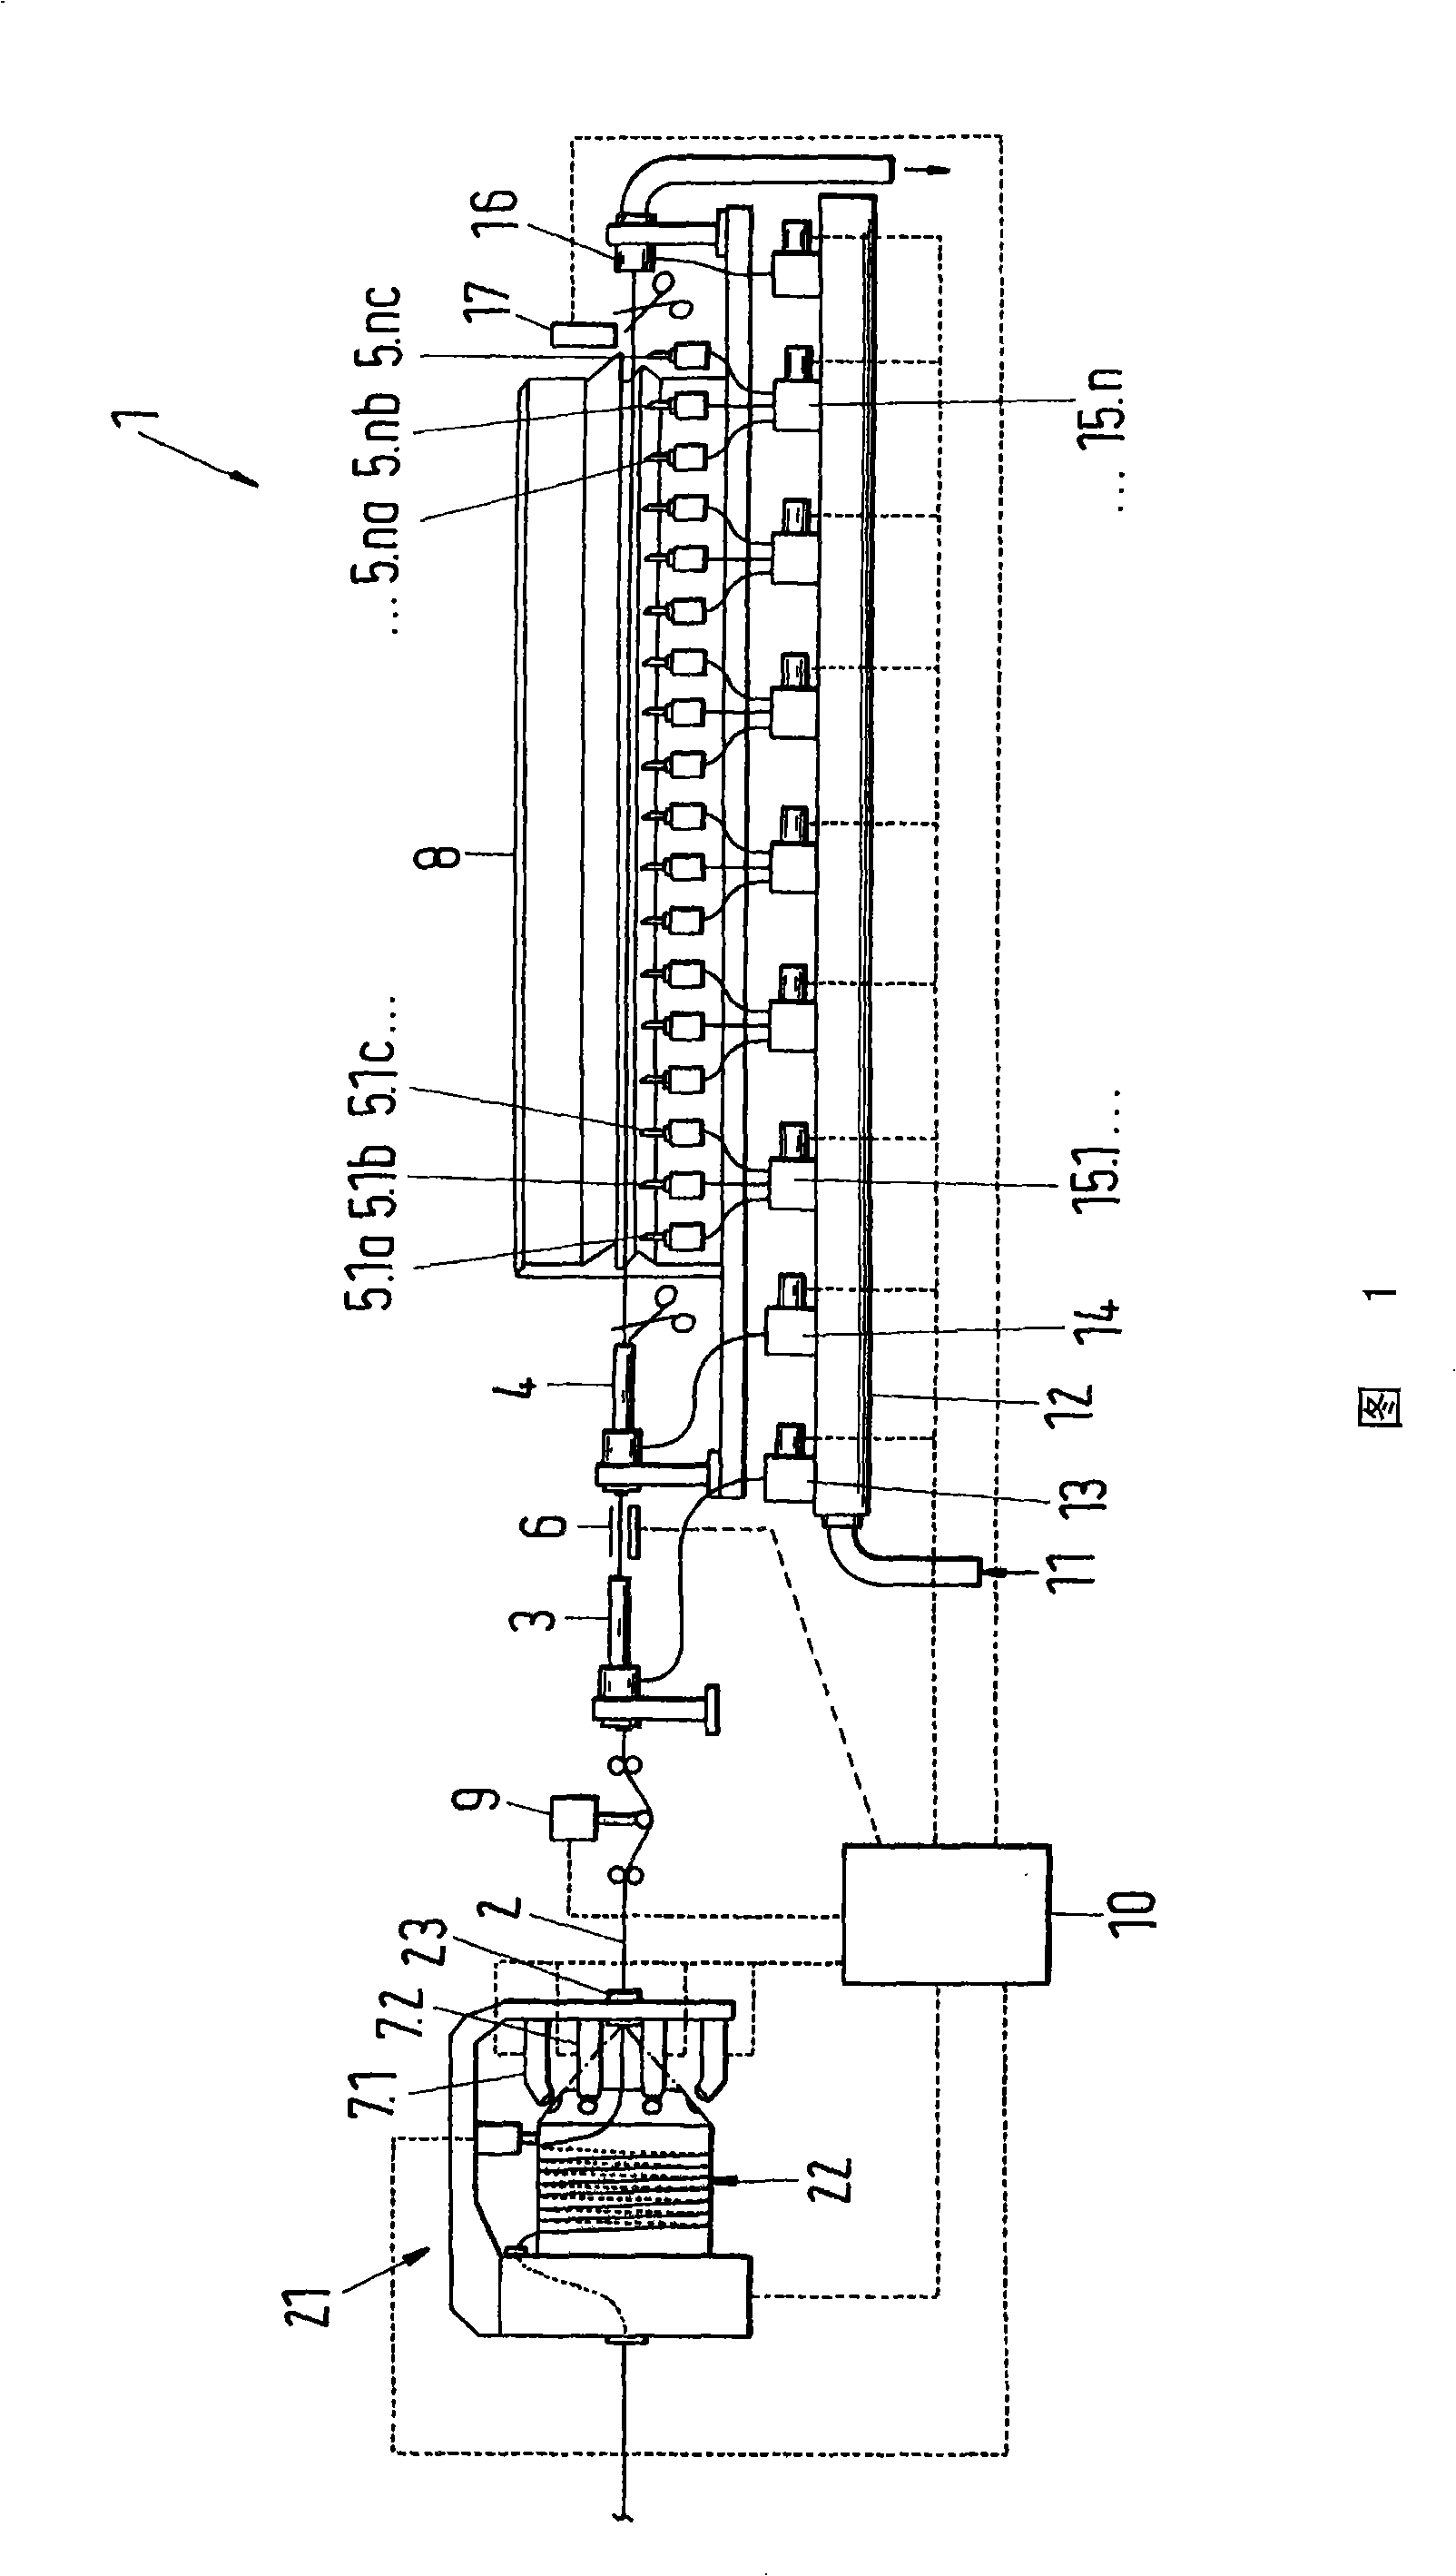 Method and device for inserting weft thread into a loom